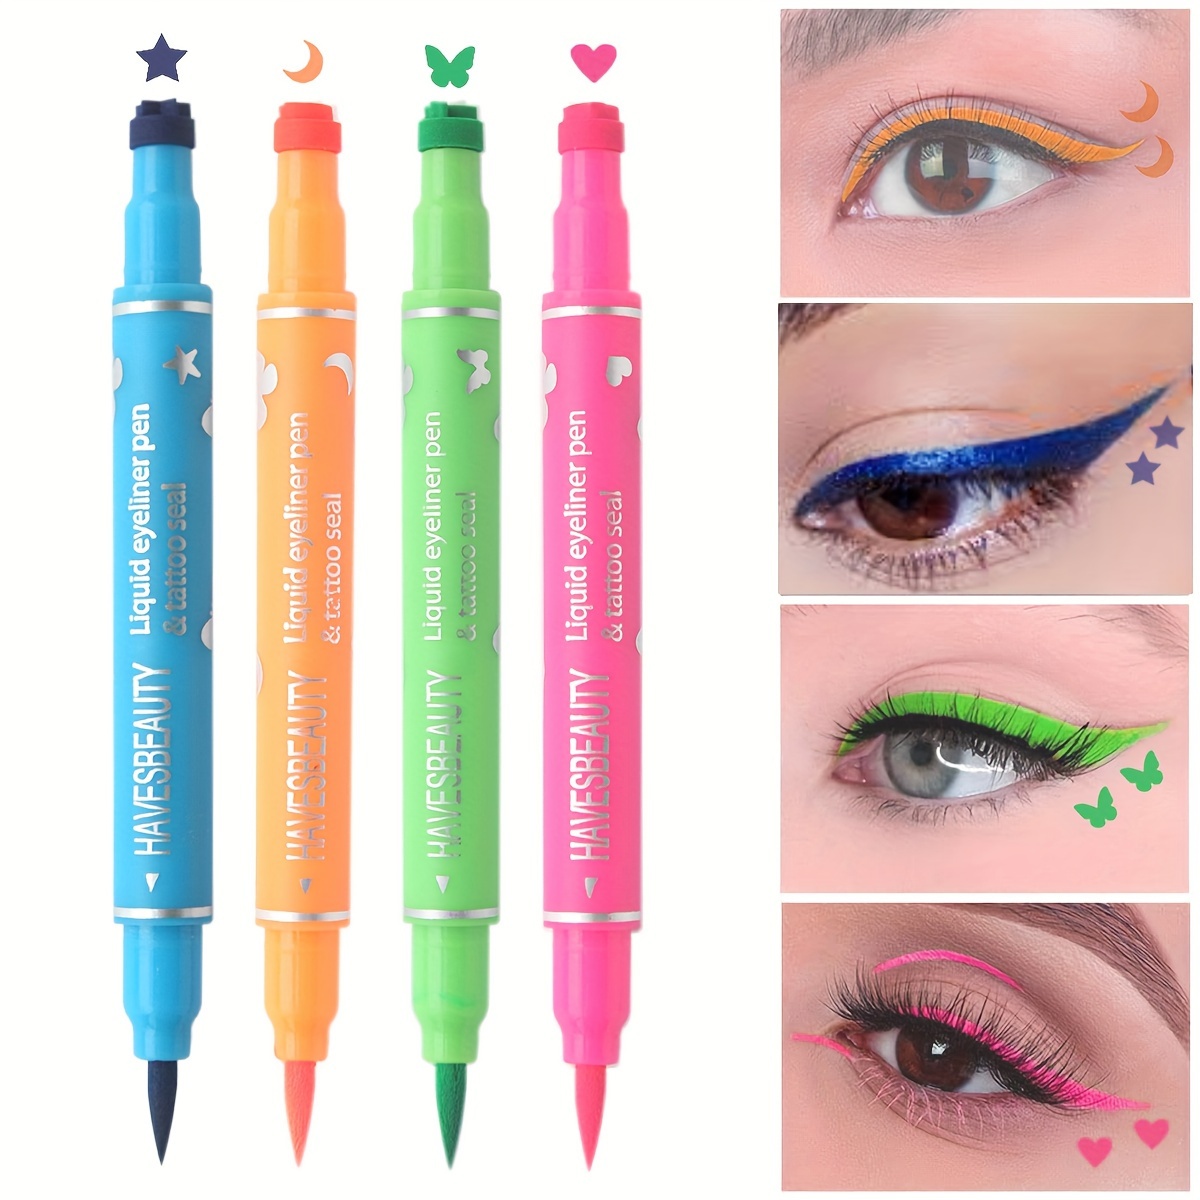 

Liquid Stamp Eyeliner Set Of 4 - Waterproof Colored Gel Felt Tip Eyeliners With Star, Heart, Moon, Butterfly Stamps - Mixed Color System Slim Wingliner Shapes For Creative Makeup Styles